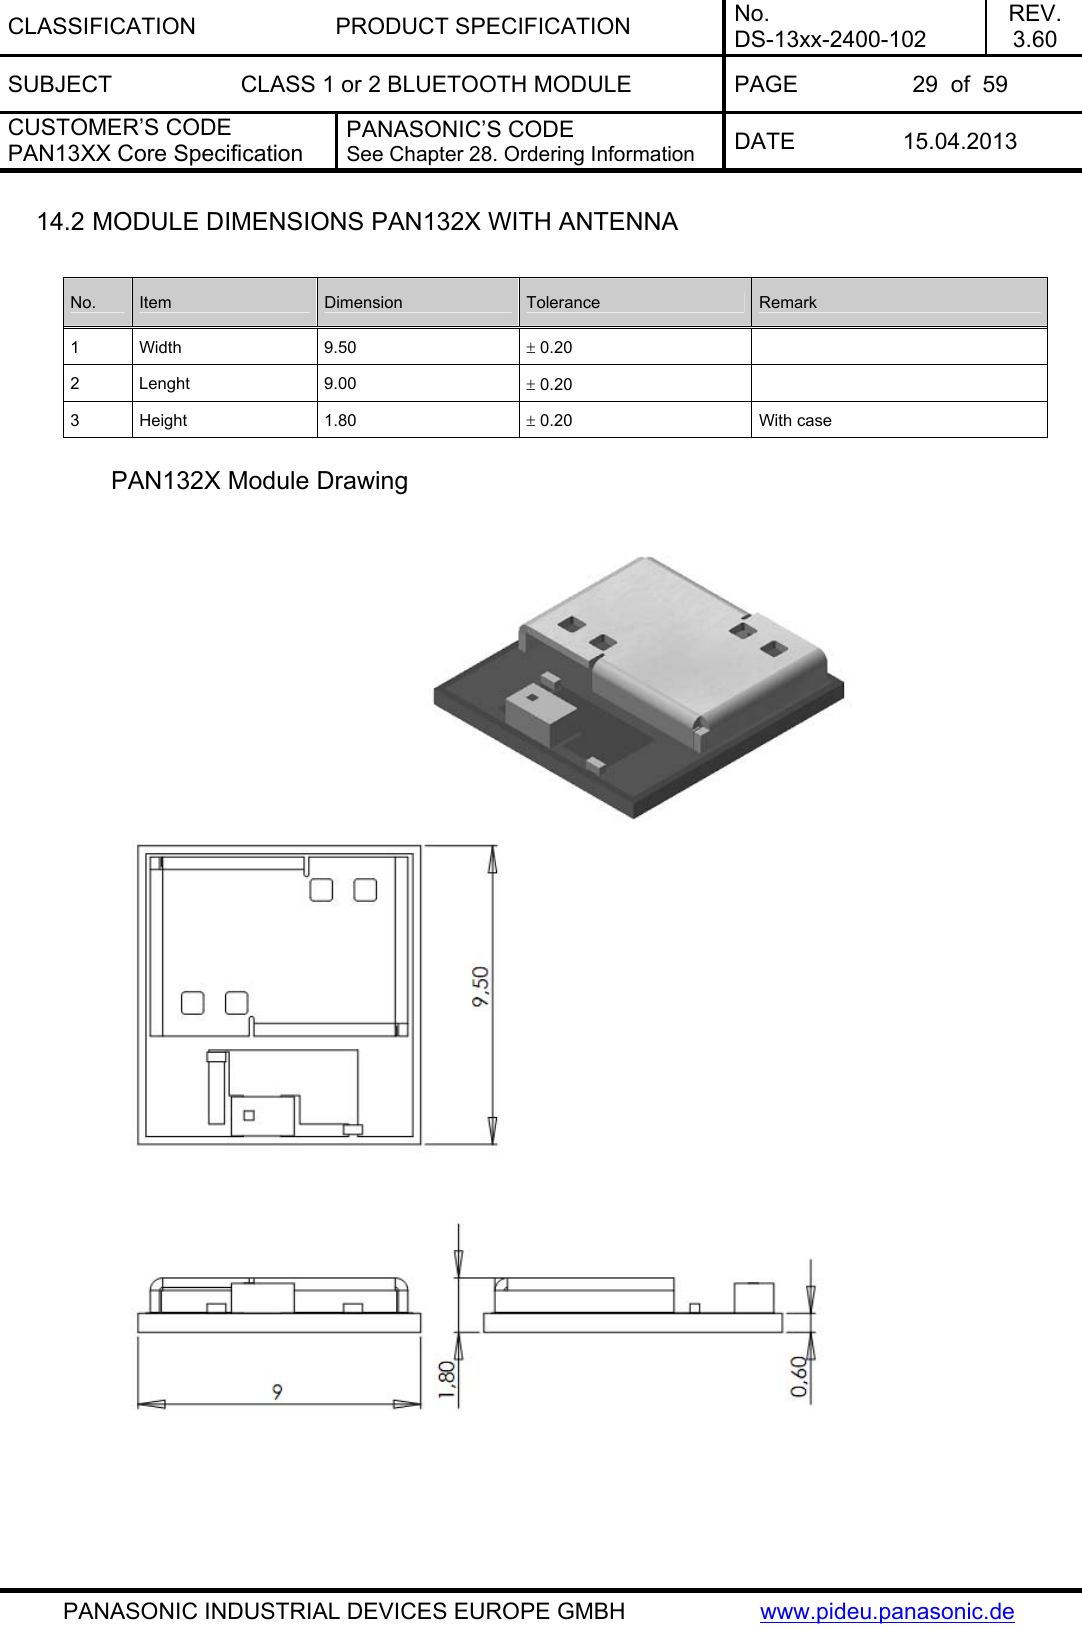 CLASSIFICATION PRODUCT SPECIFICATION No. DS-13xx-2400-102 REV. 3.60 SUBJECT  CLASS 1 or 2 BLUETOOTH MODULE  PAGE  29  of  59 CUSTOMER’S CODE PAN13XX Core Specification PANASONIC’S CODE See Chapter 28. Ordering Information  DATE 15.04.2013   PANASONIC INDUSTRIAL DEVICES EUROPE GMBH  www.pideu.panasonic.de 14.2 MODULE DIMENSIONS PAN132X WITH ANTENNA  No.  Item  Dimension  Tolerance  Remark 1 Width  9.50  ± 0.20   2 Lenght  9.00  ± 0.20   3 Height  1.80  ± 0.20  With case  PAN132X Module Drawing    